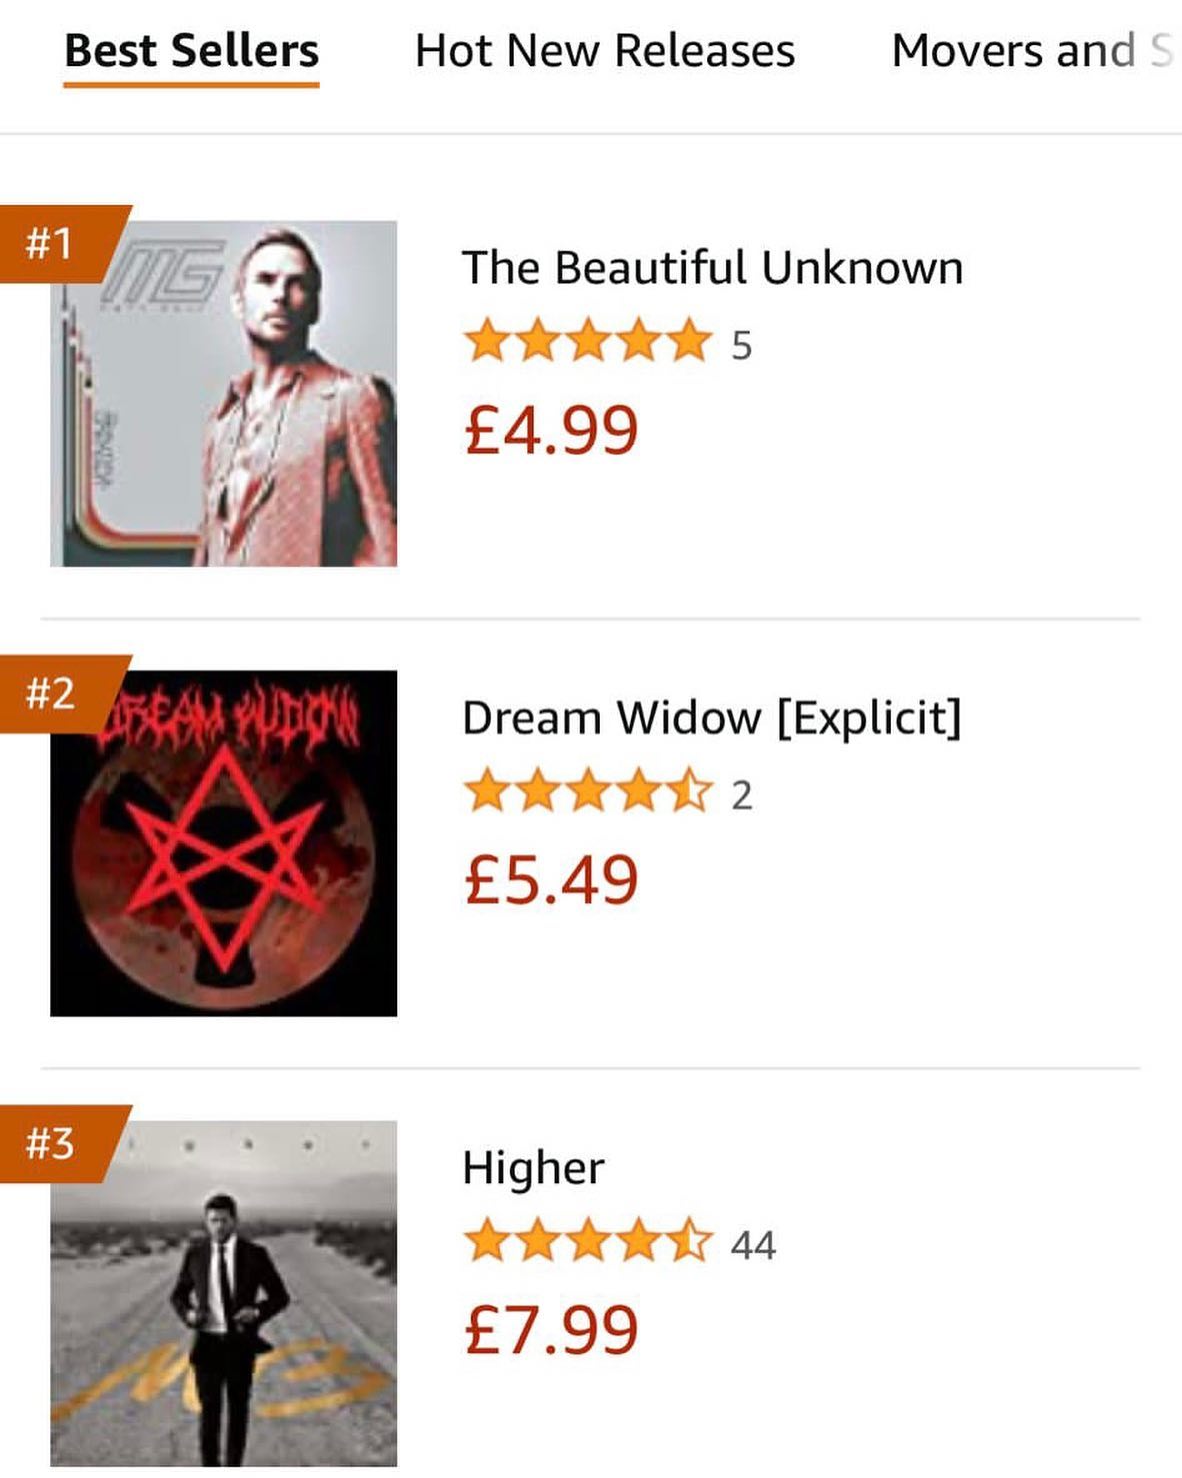 WE DID IT !!!
Matt Goss has the Number 1 spot on the Amazon Best Selling Album this week.

You the fans have done this, your support for @mattgoss is incredible, so thank you to everyone that has bought the album this week and attended the signings.

THIS IS JUST THE START !!!!

#mattgoss #bros #uk #newmusic #music #singer #london #songwriter #singersongwriter #instamusic #musician #musicartist #musiciansofinstagram #musicbusiness #musicindustry #fashion #newalbum #newsingle #somewheretofall #betterwithyou #thebeautifulunknown #saved